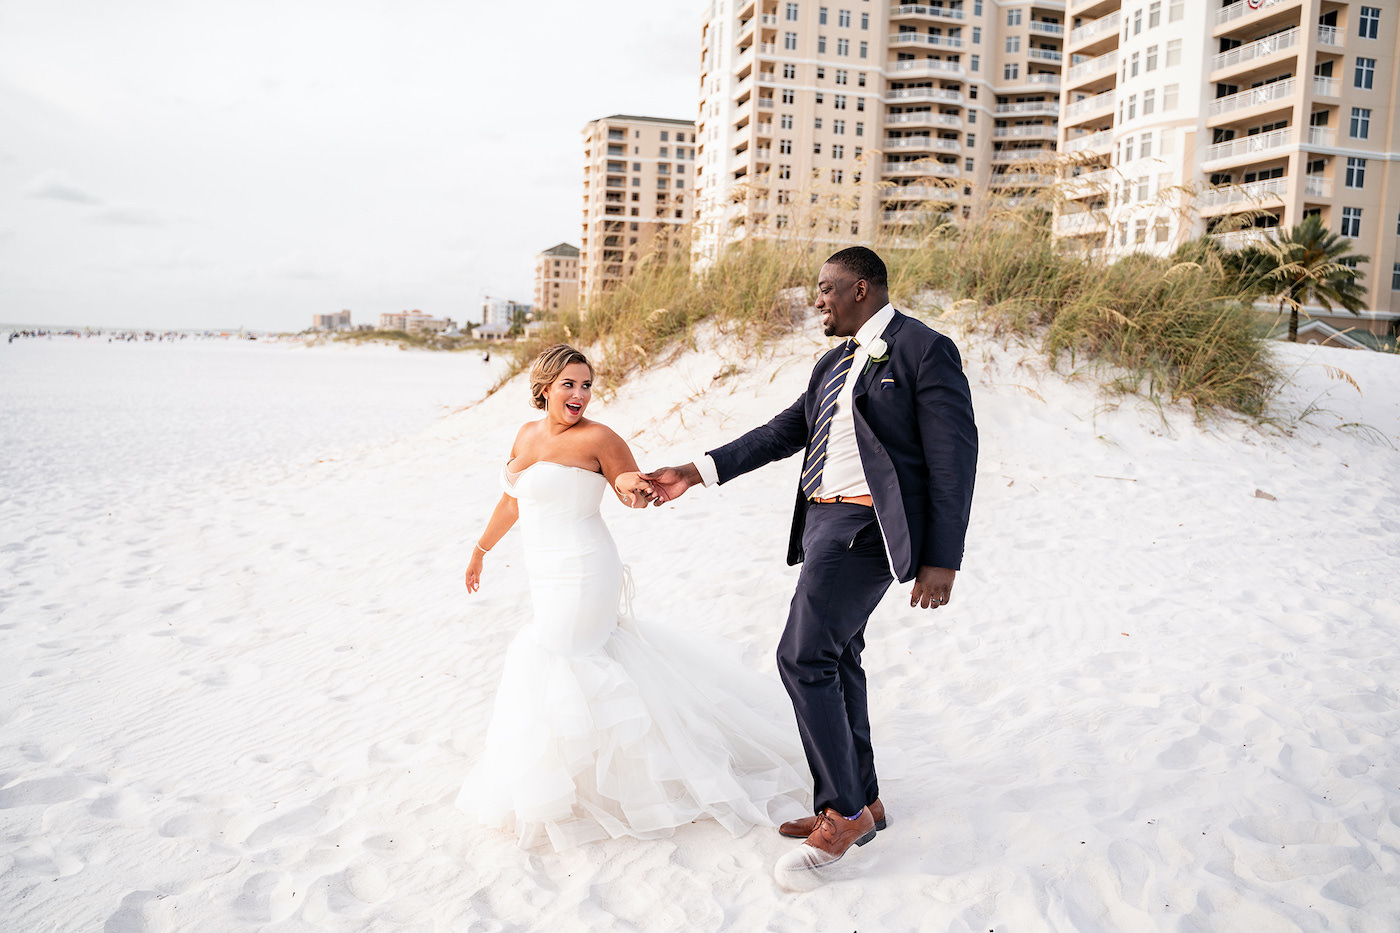 Tampa Bay Bride and Groom Beachfront Wedding Portraits, Romantic Tropical Bride and Groom Just Married on the sand of Clearwater Beach, Bride Wearing Sophisticated Fit and Flare Strapless Wedding Dress | Florida Gulf of Mexico Hotel and Wedding Venue Hilton Clearwater Beach